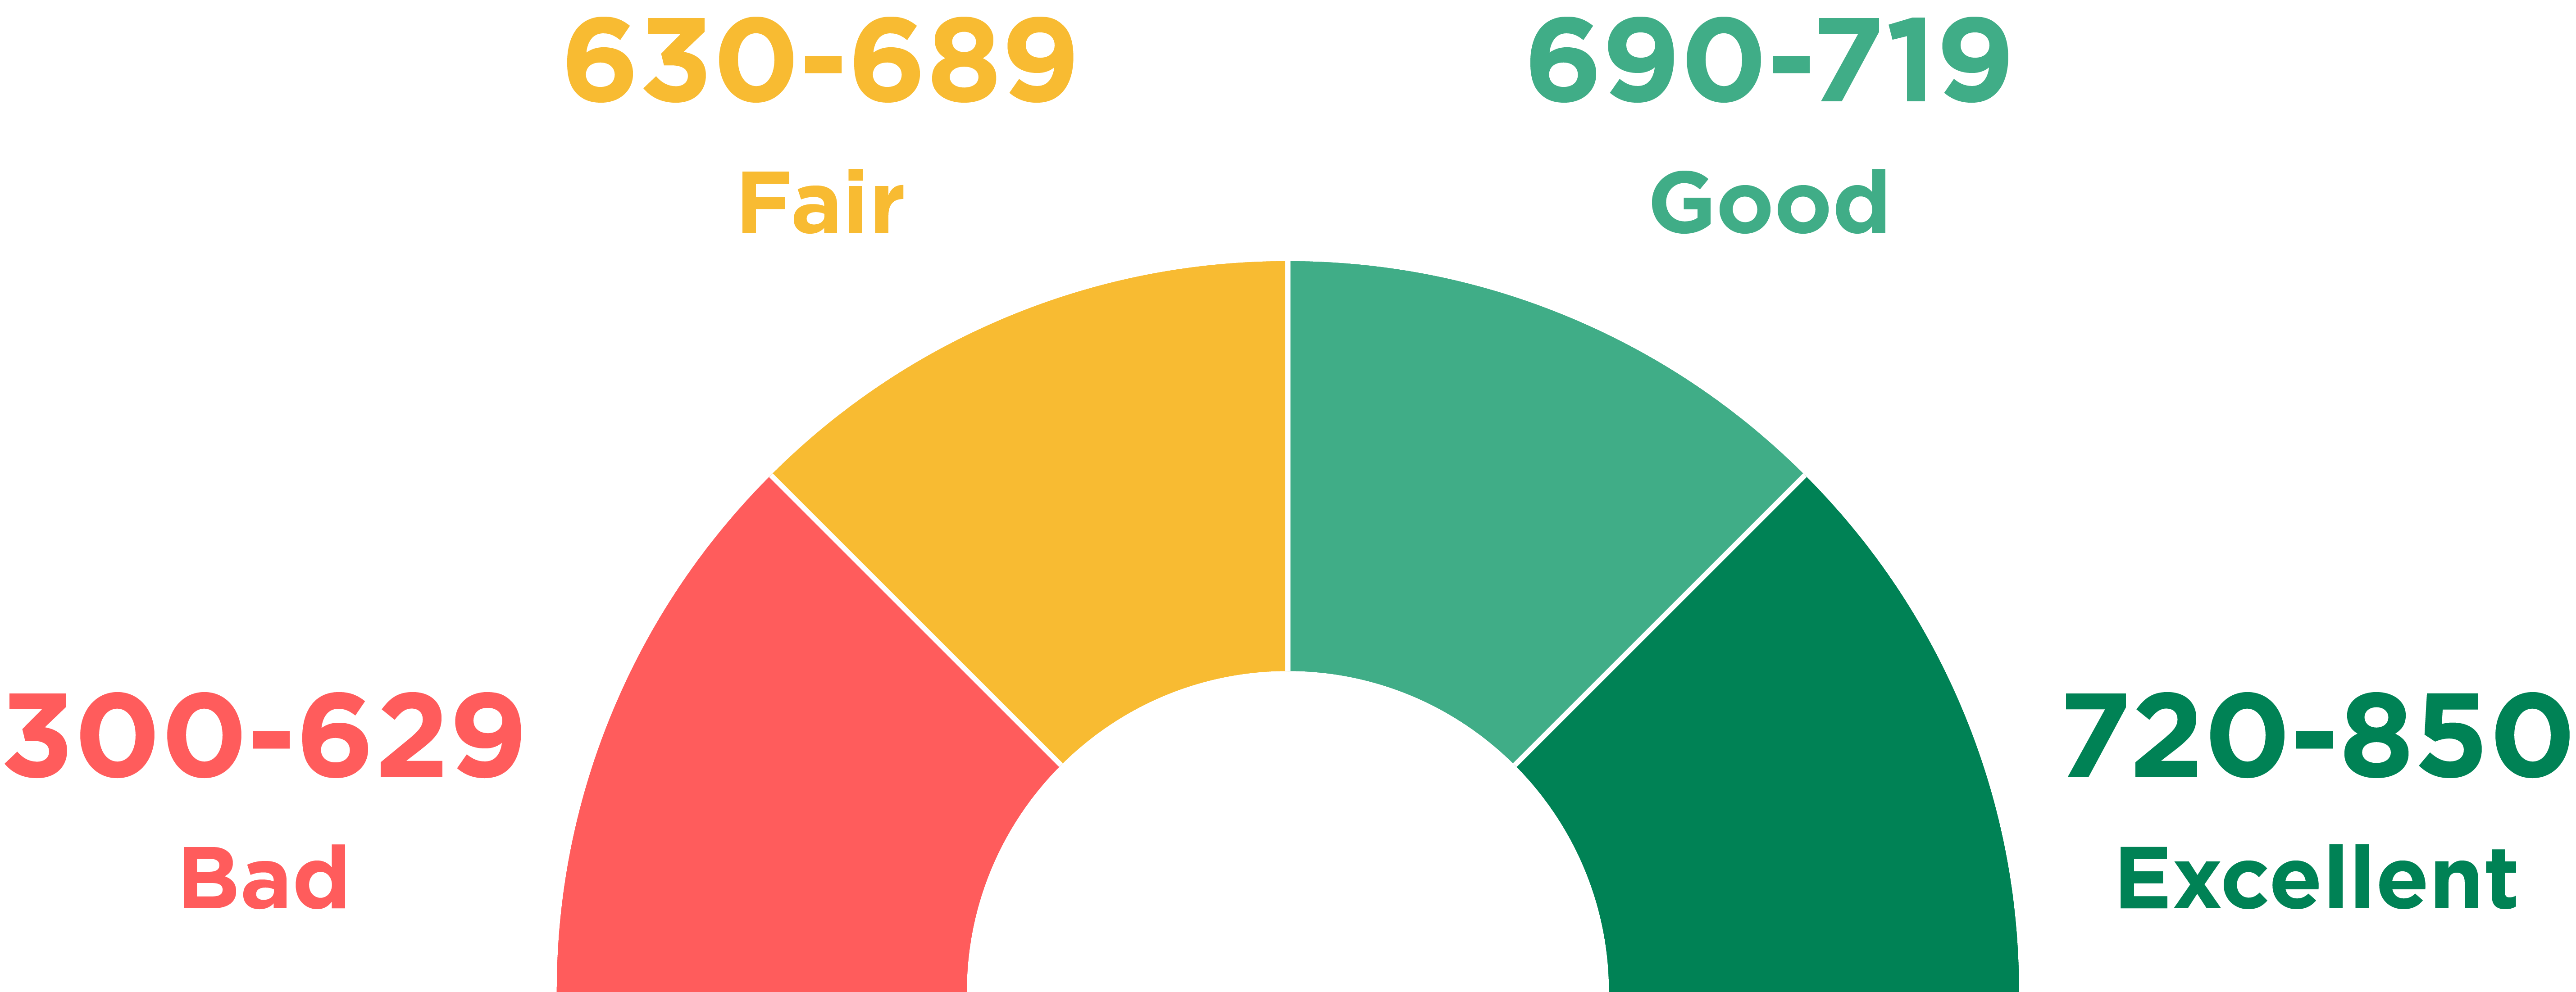 Credit Score Ranges: How Do You Compare?